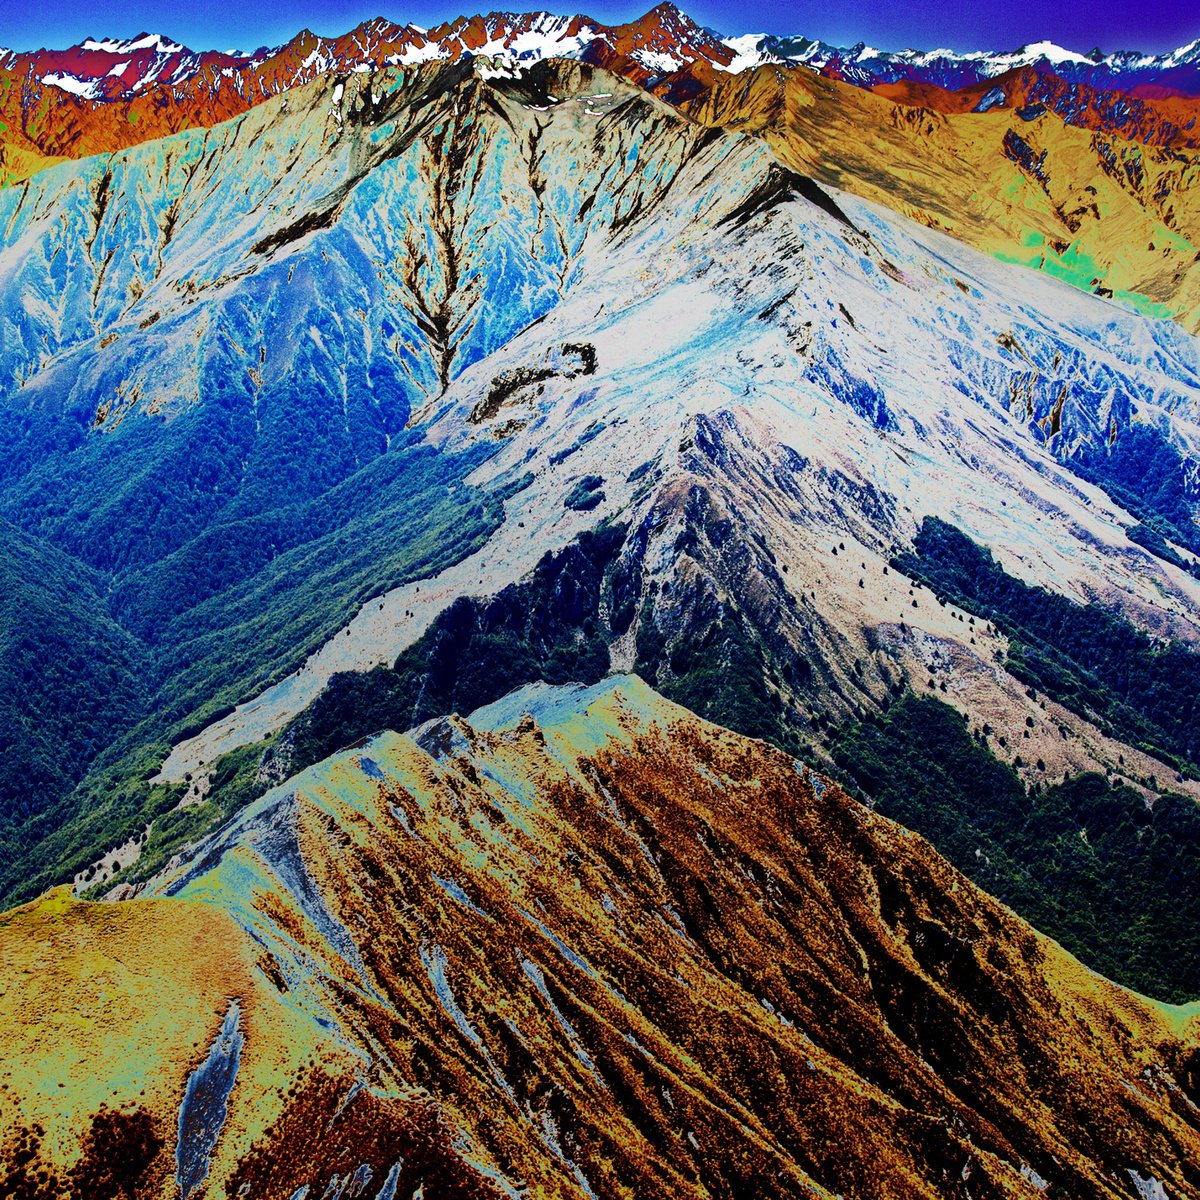 Natural Abstracts - Summery Southern Alps - Mini by Ken Skehan